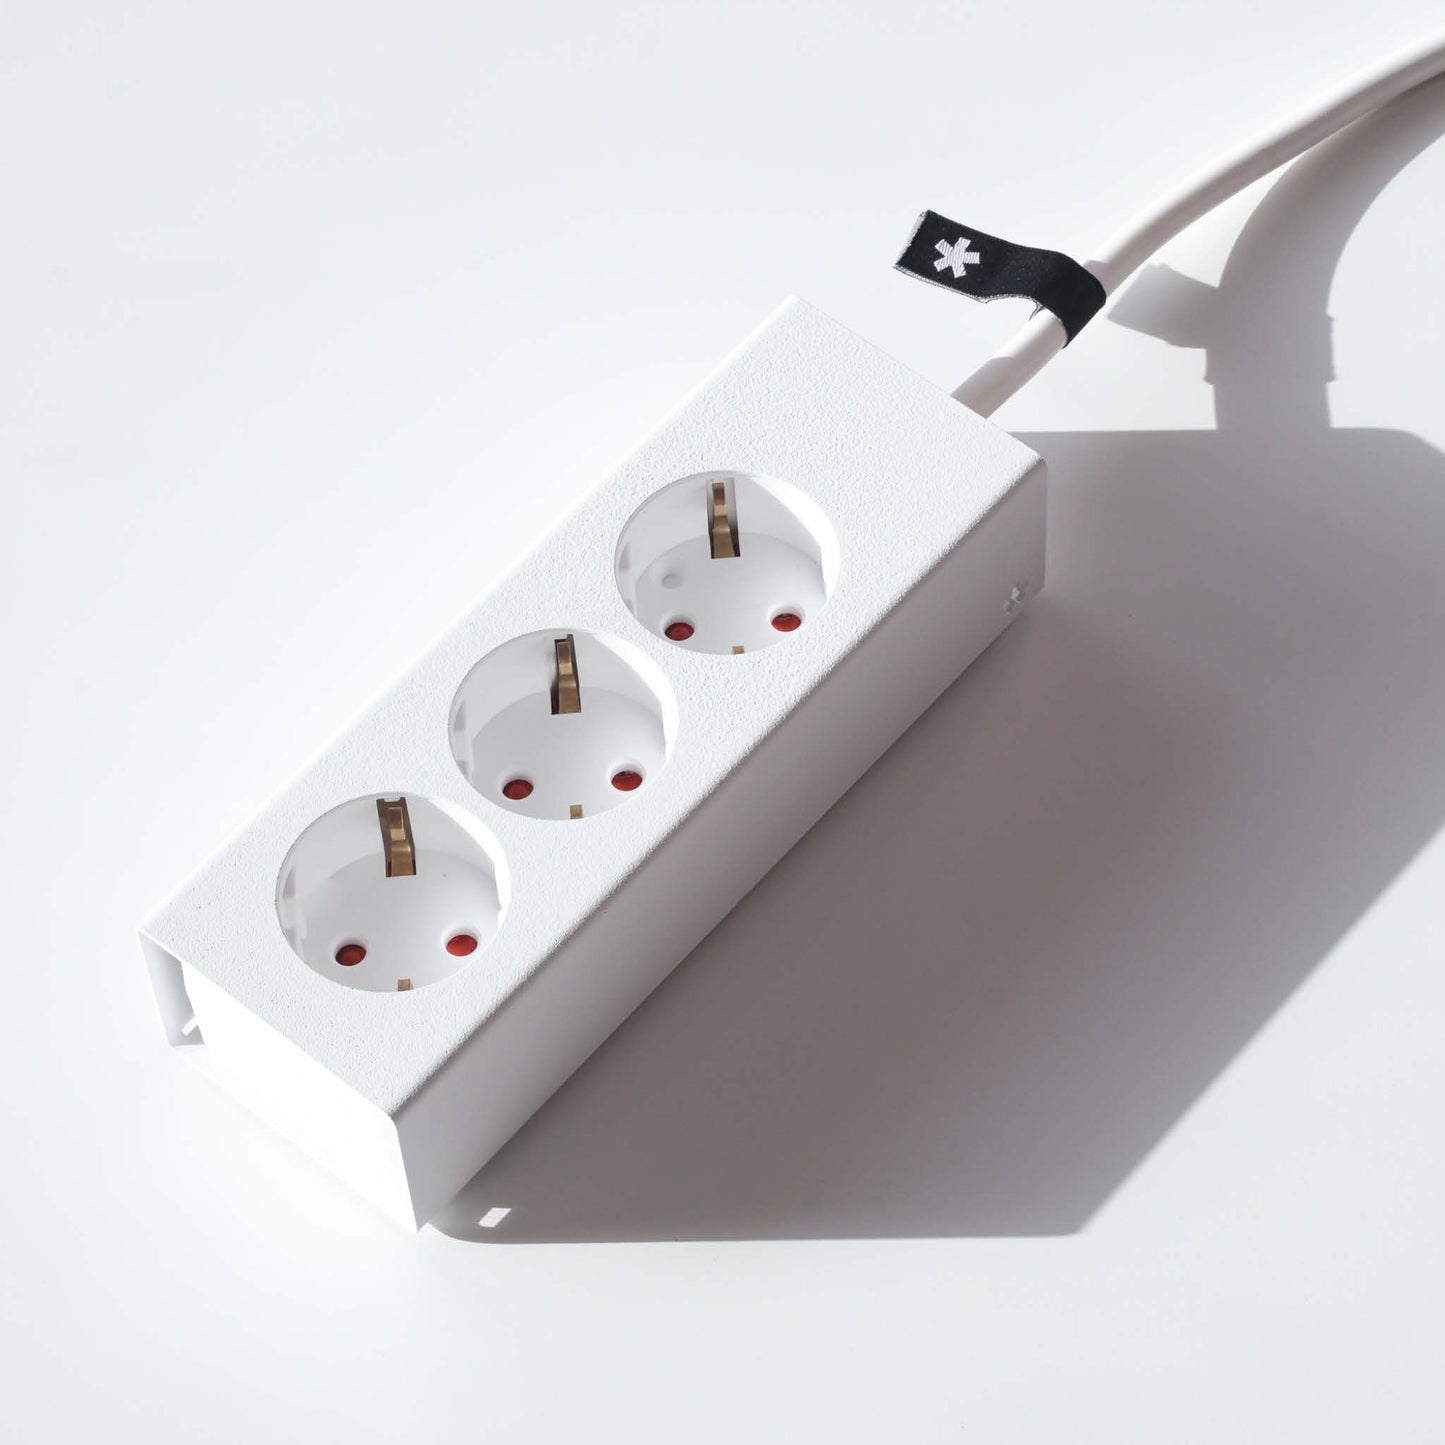 Power strip with minimal design | Peppermint products